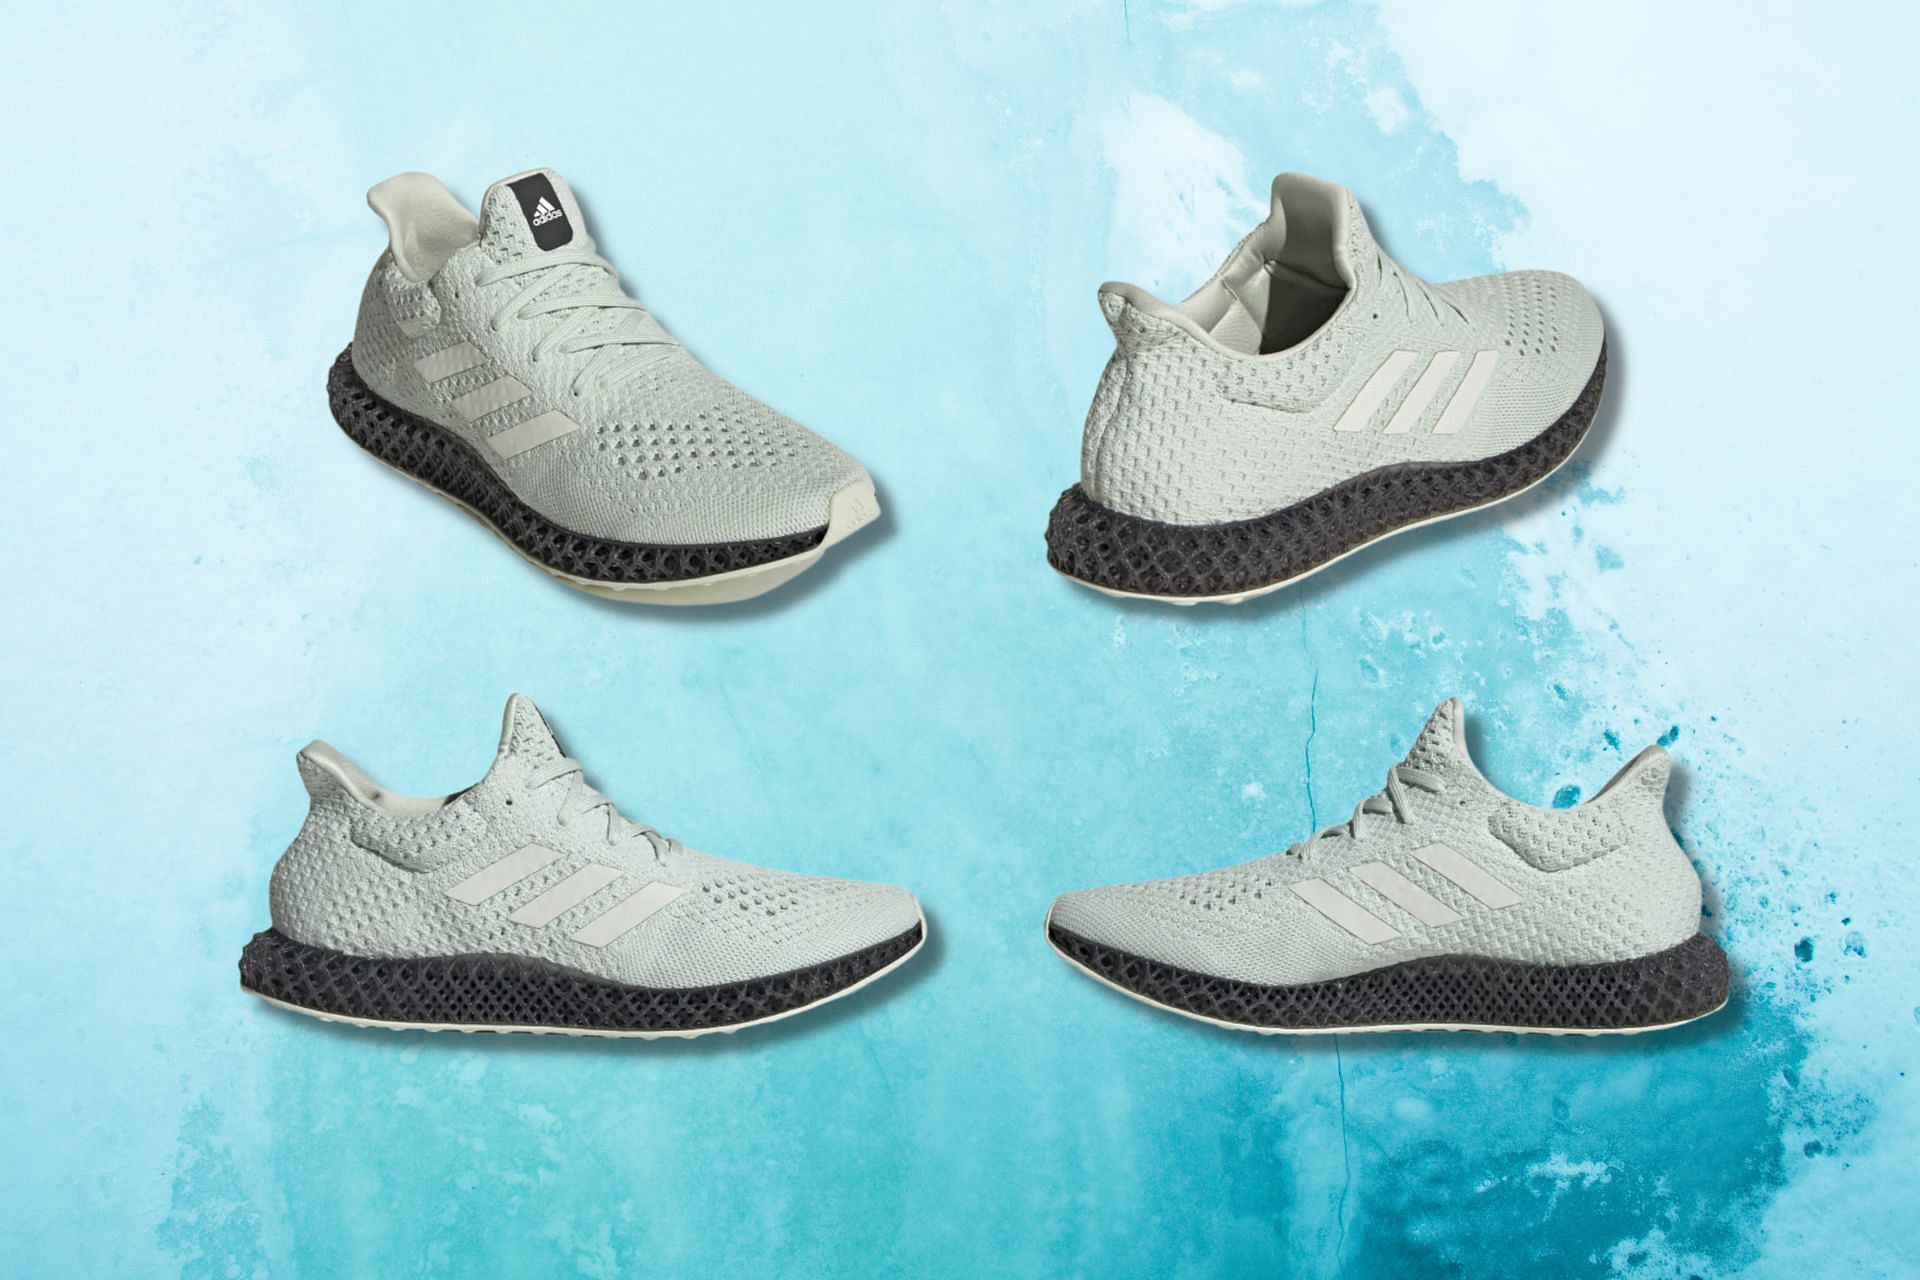 Where to buy Adidas 4D Futurecraft Linen Green? Price, date, and more